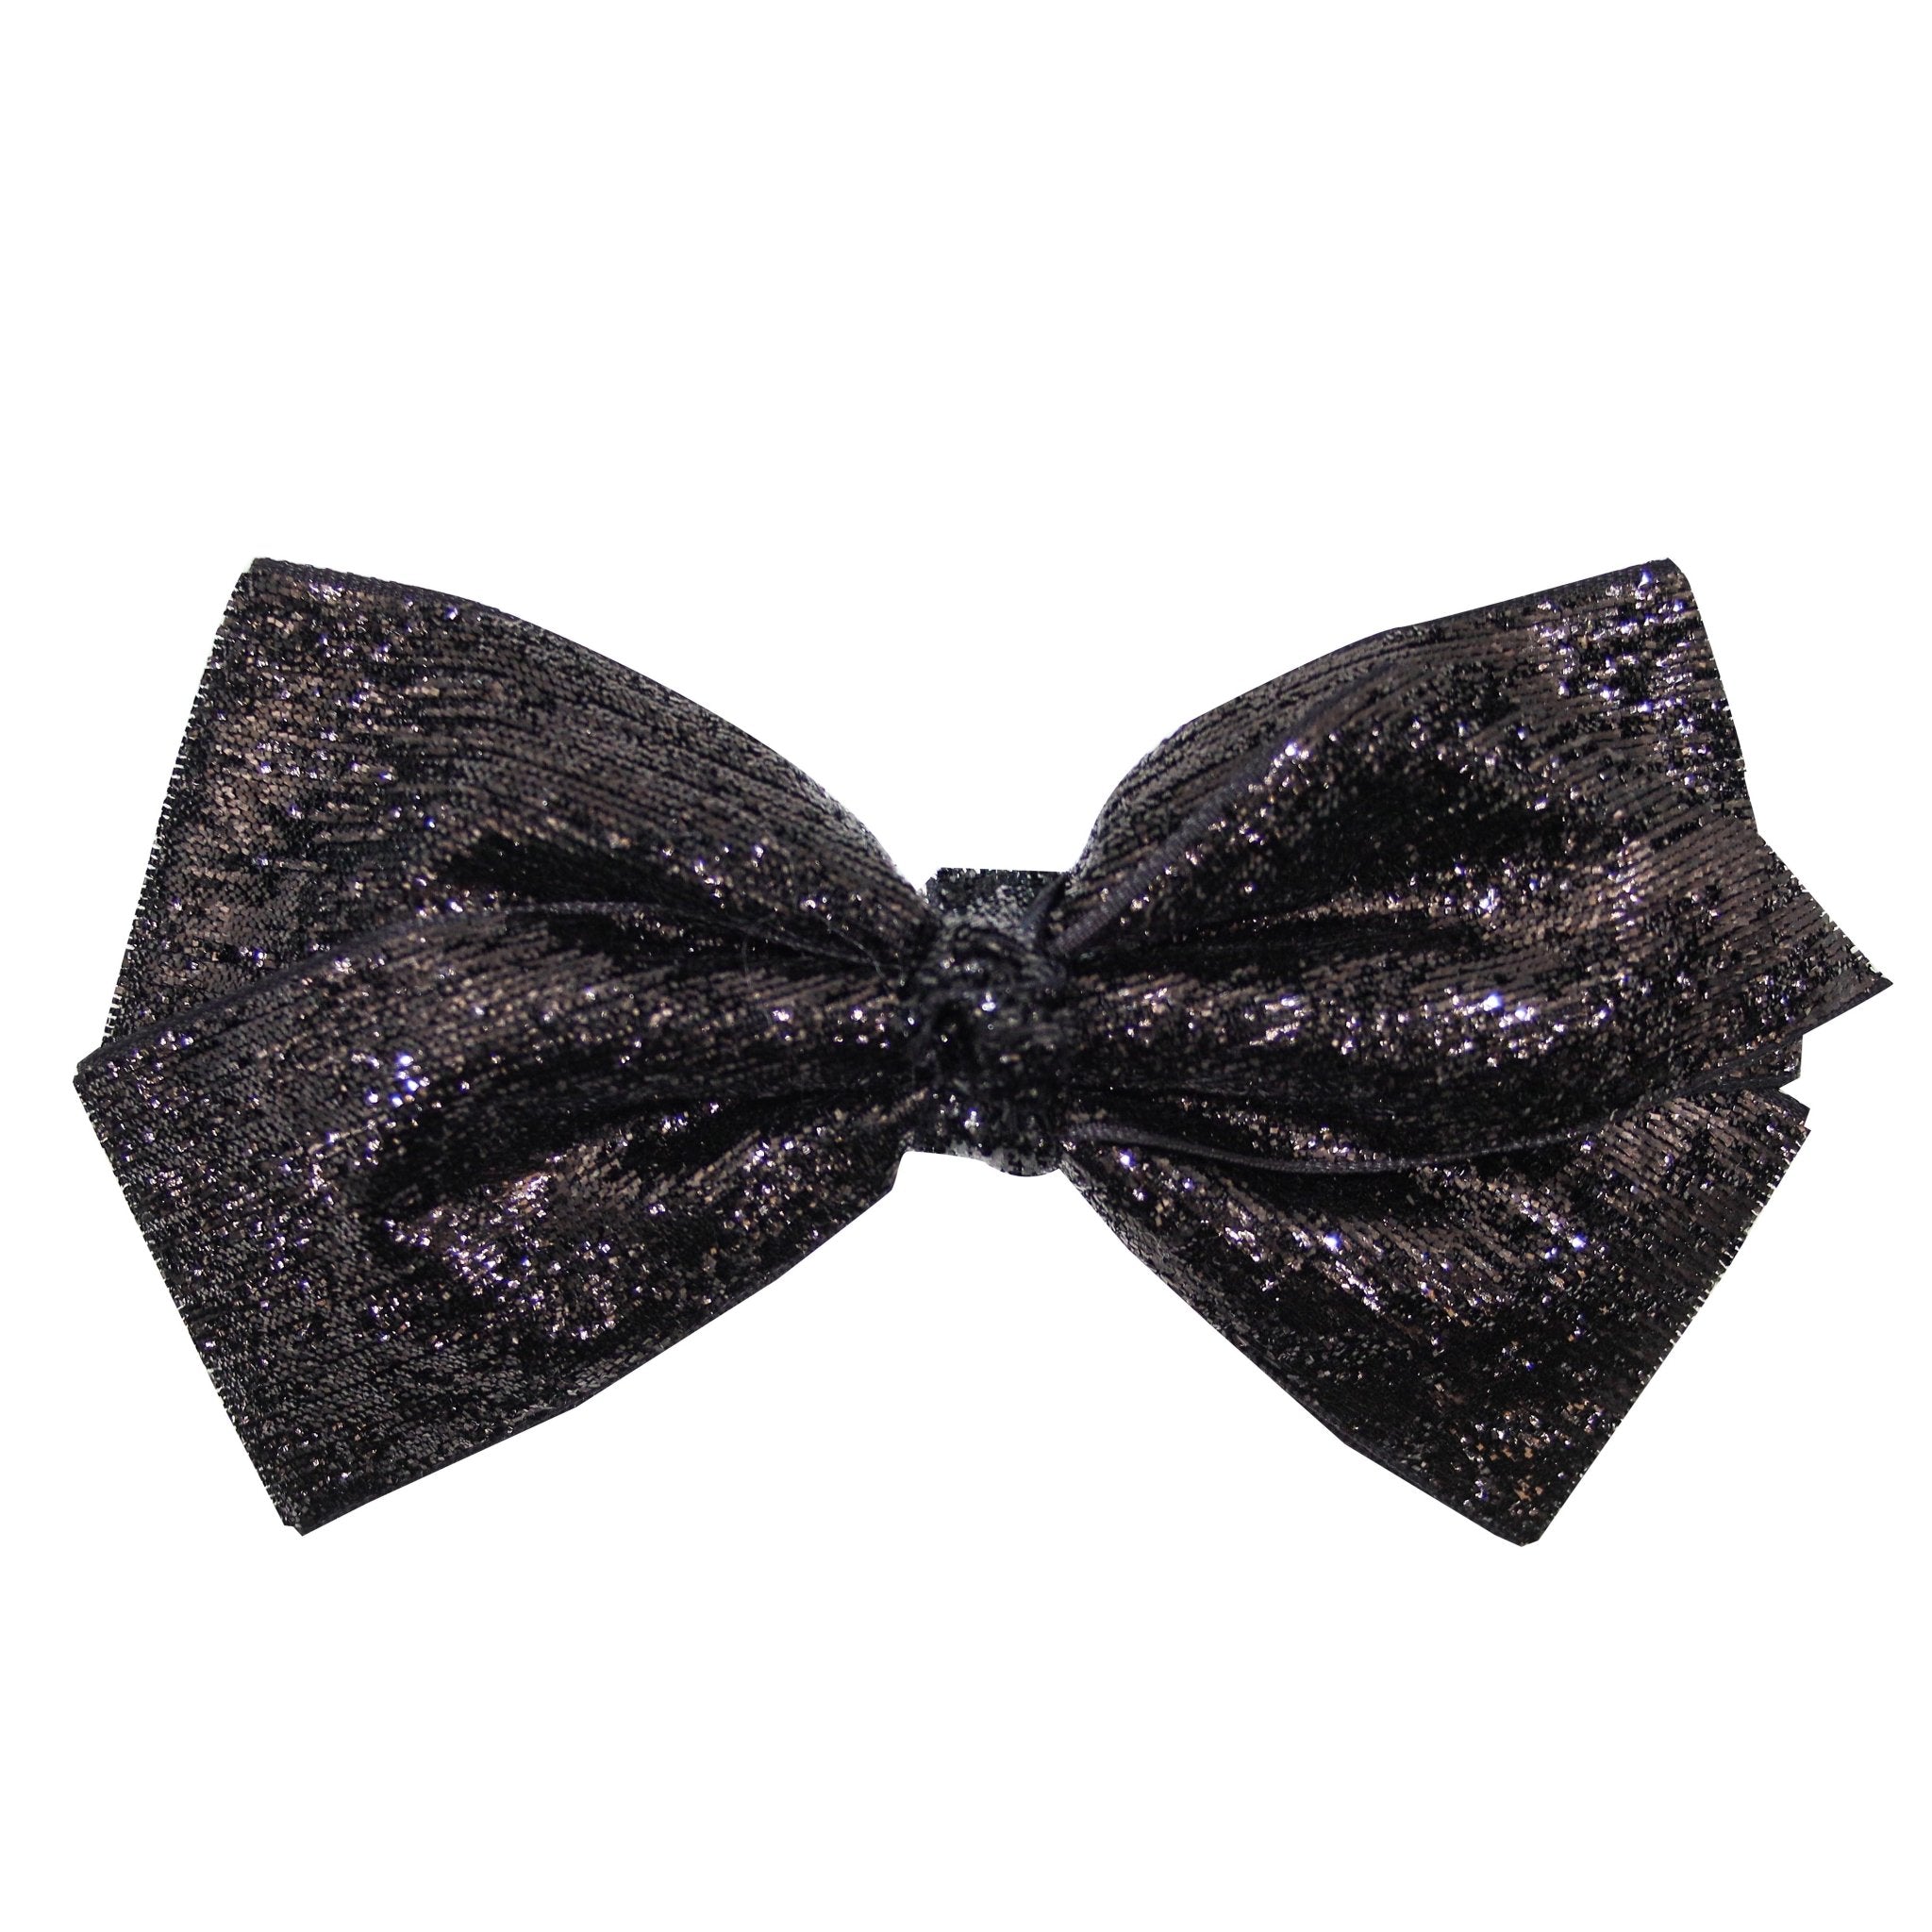 No Shed Glitter Bow - FROG SAC